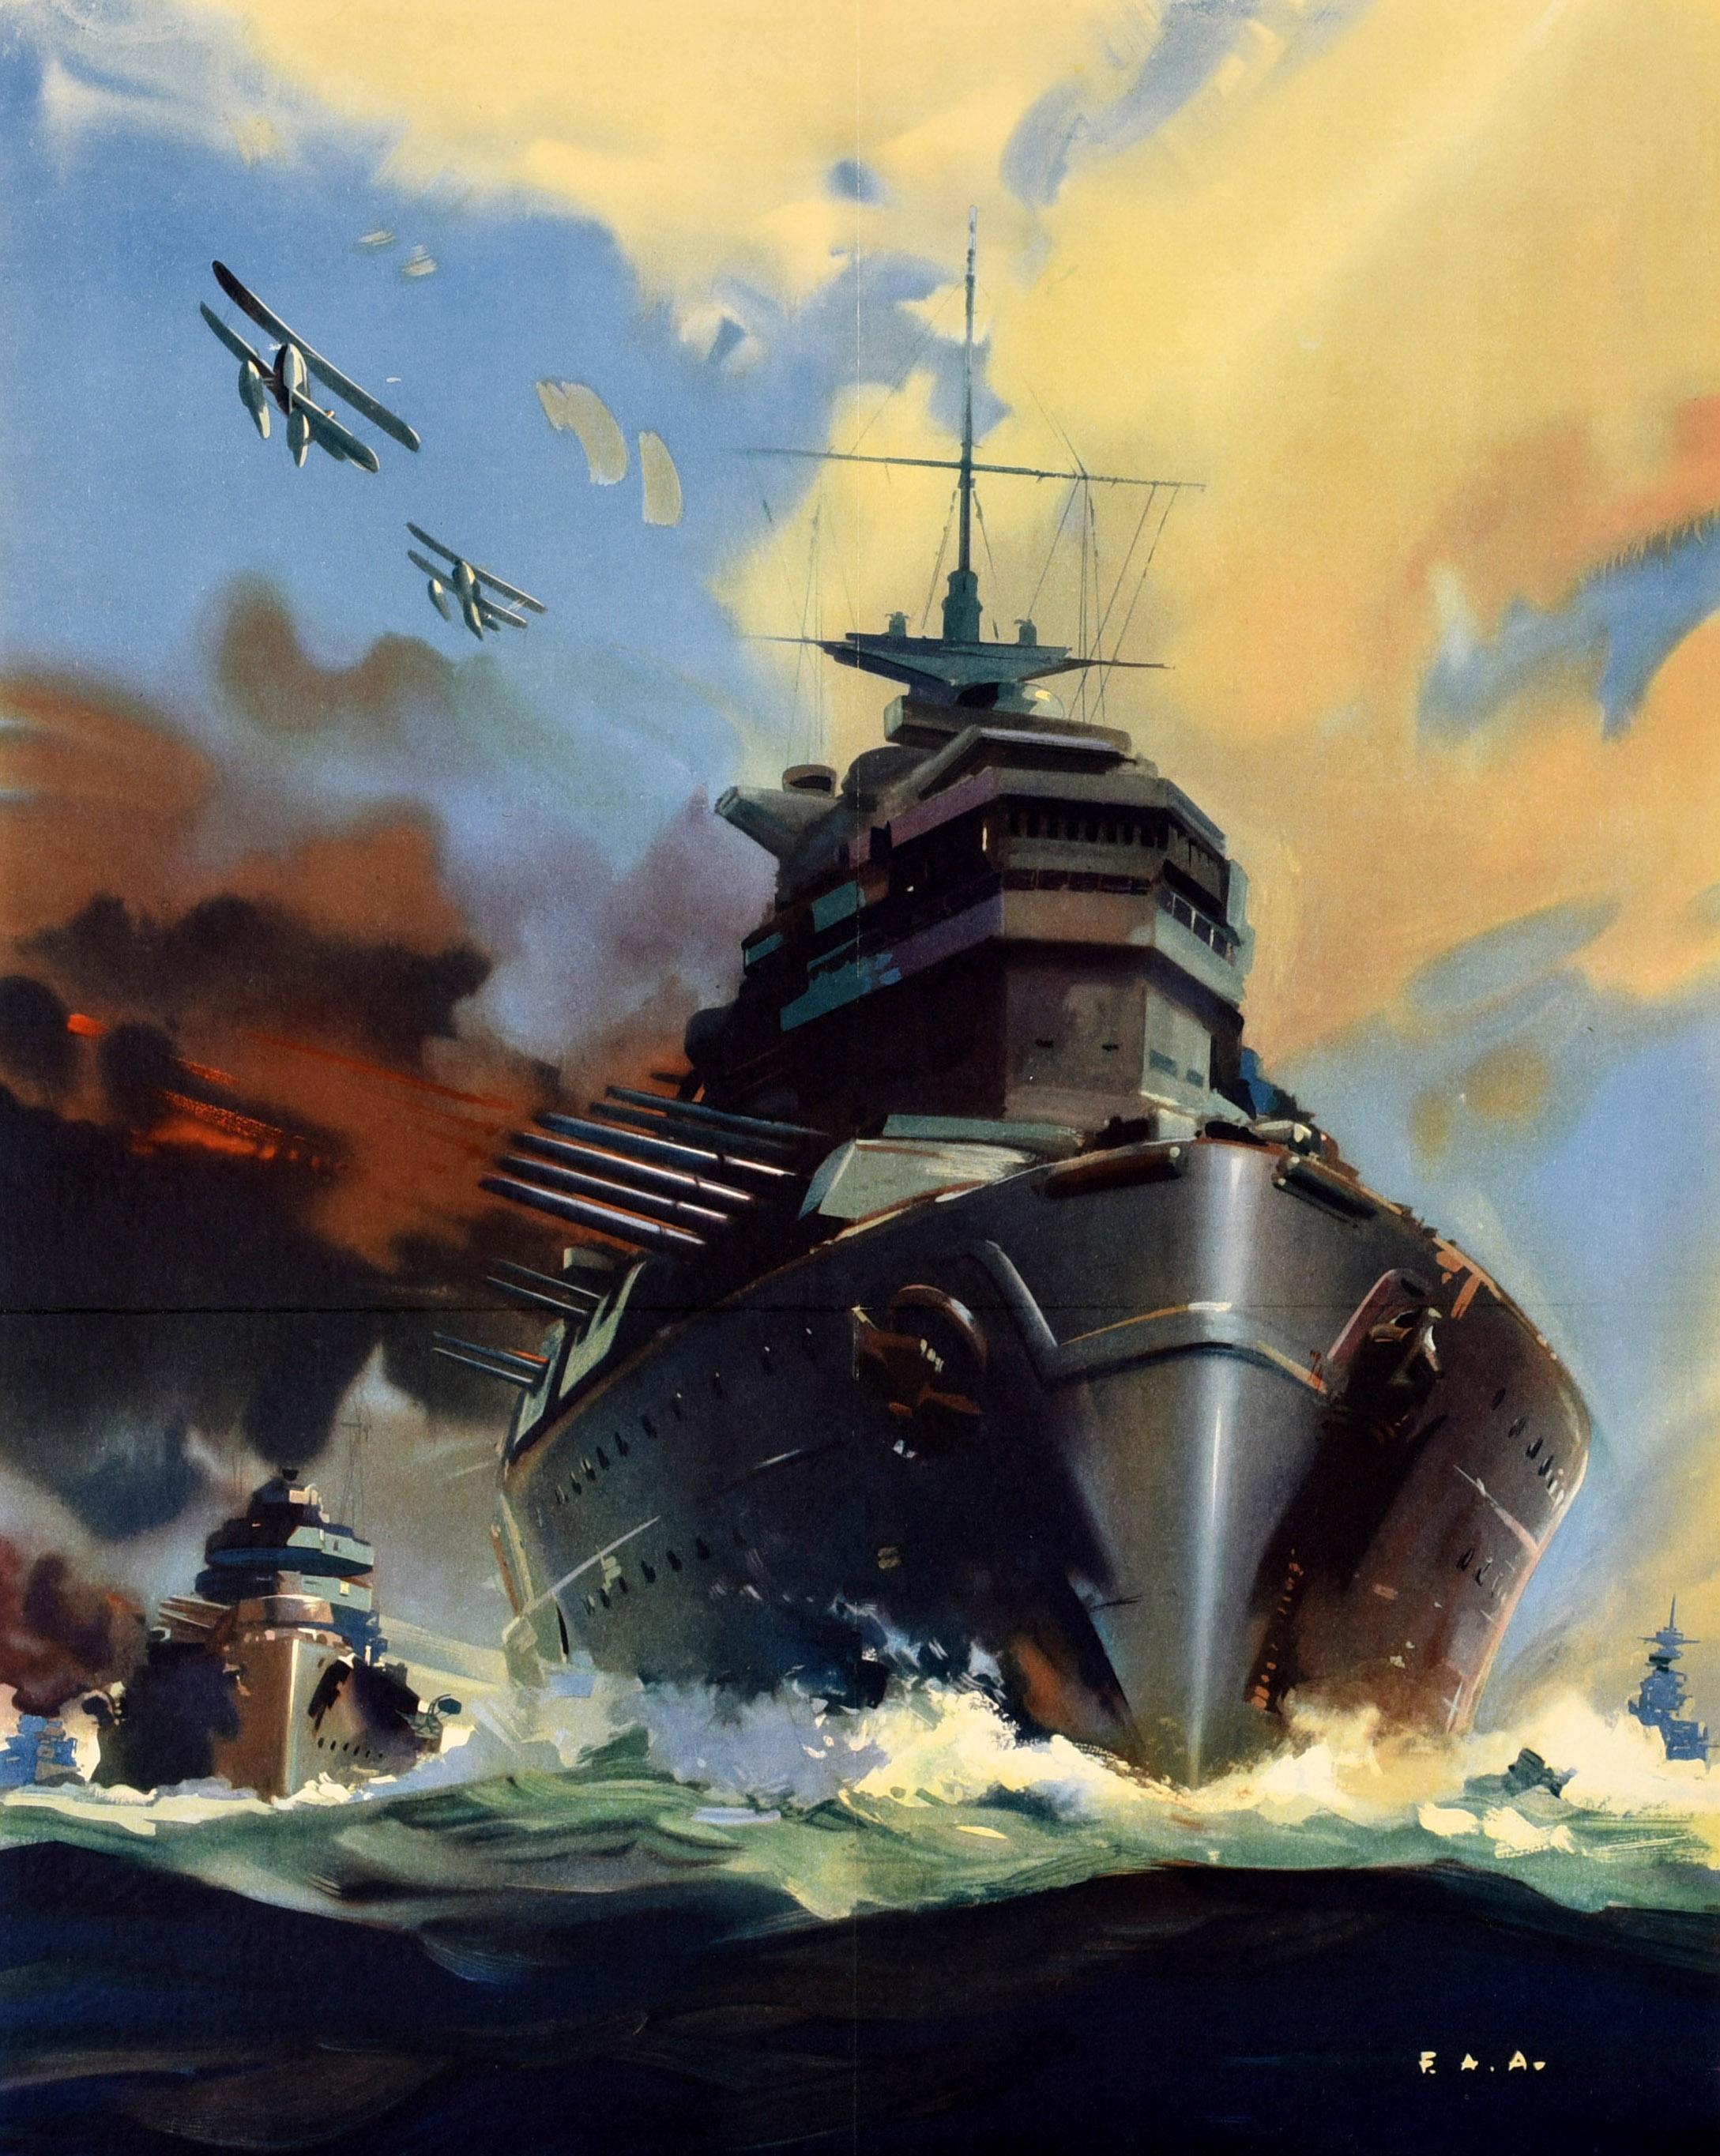 Original vintage World War Two propaganda poster - Help Britain Finish the Job! - featuring dynamic artwork depicting a warship at sea crashing through waves towards the viewer and shooting guns smoking from the cannons on the side, with biplanes